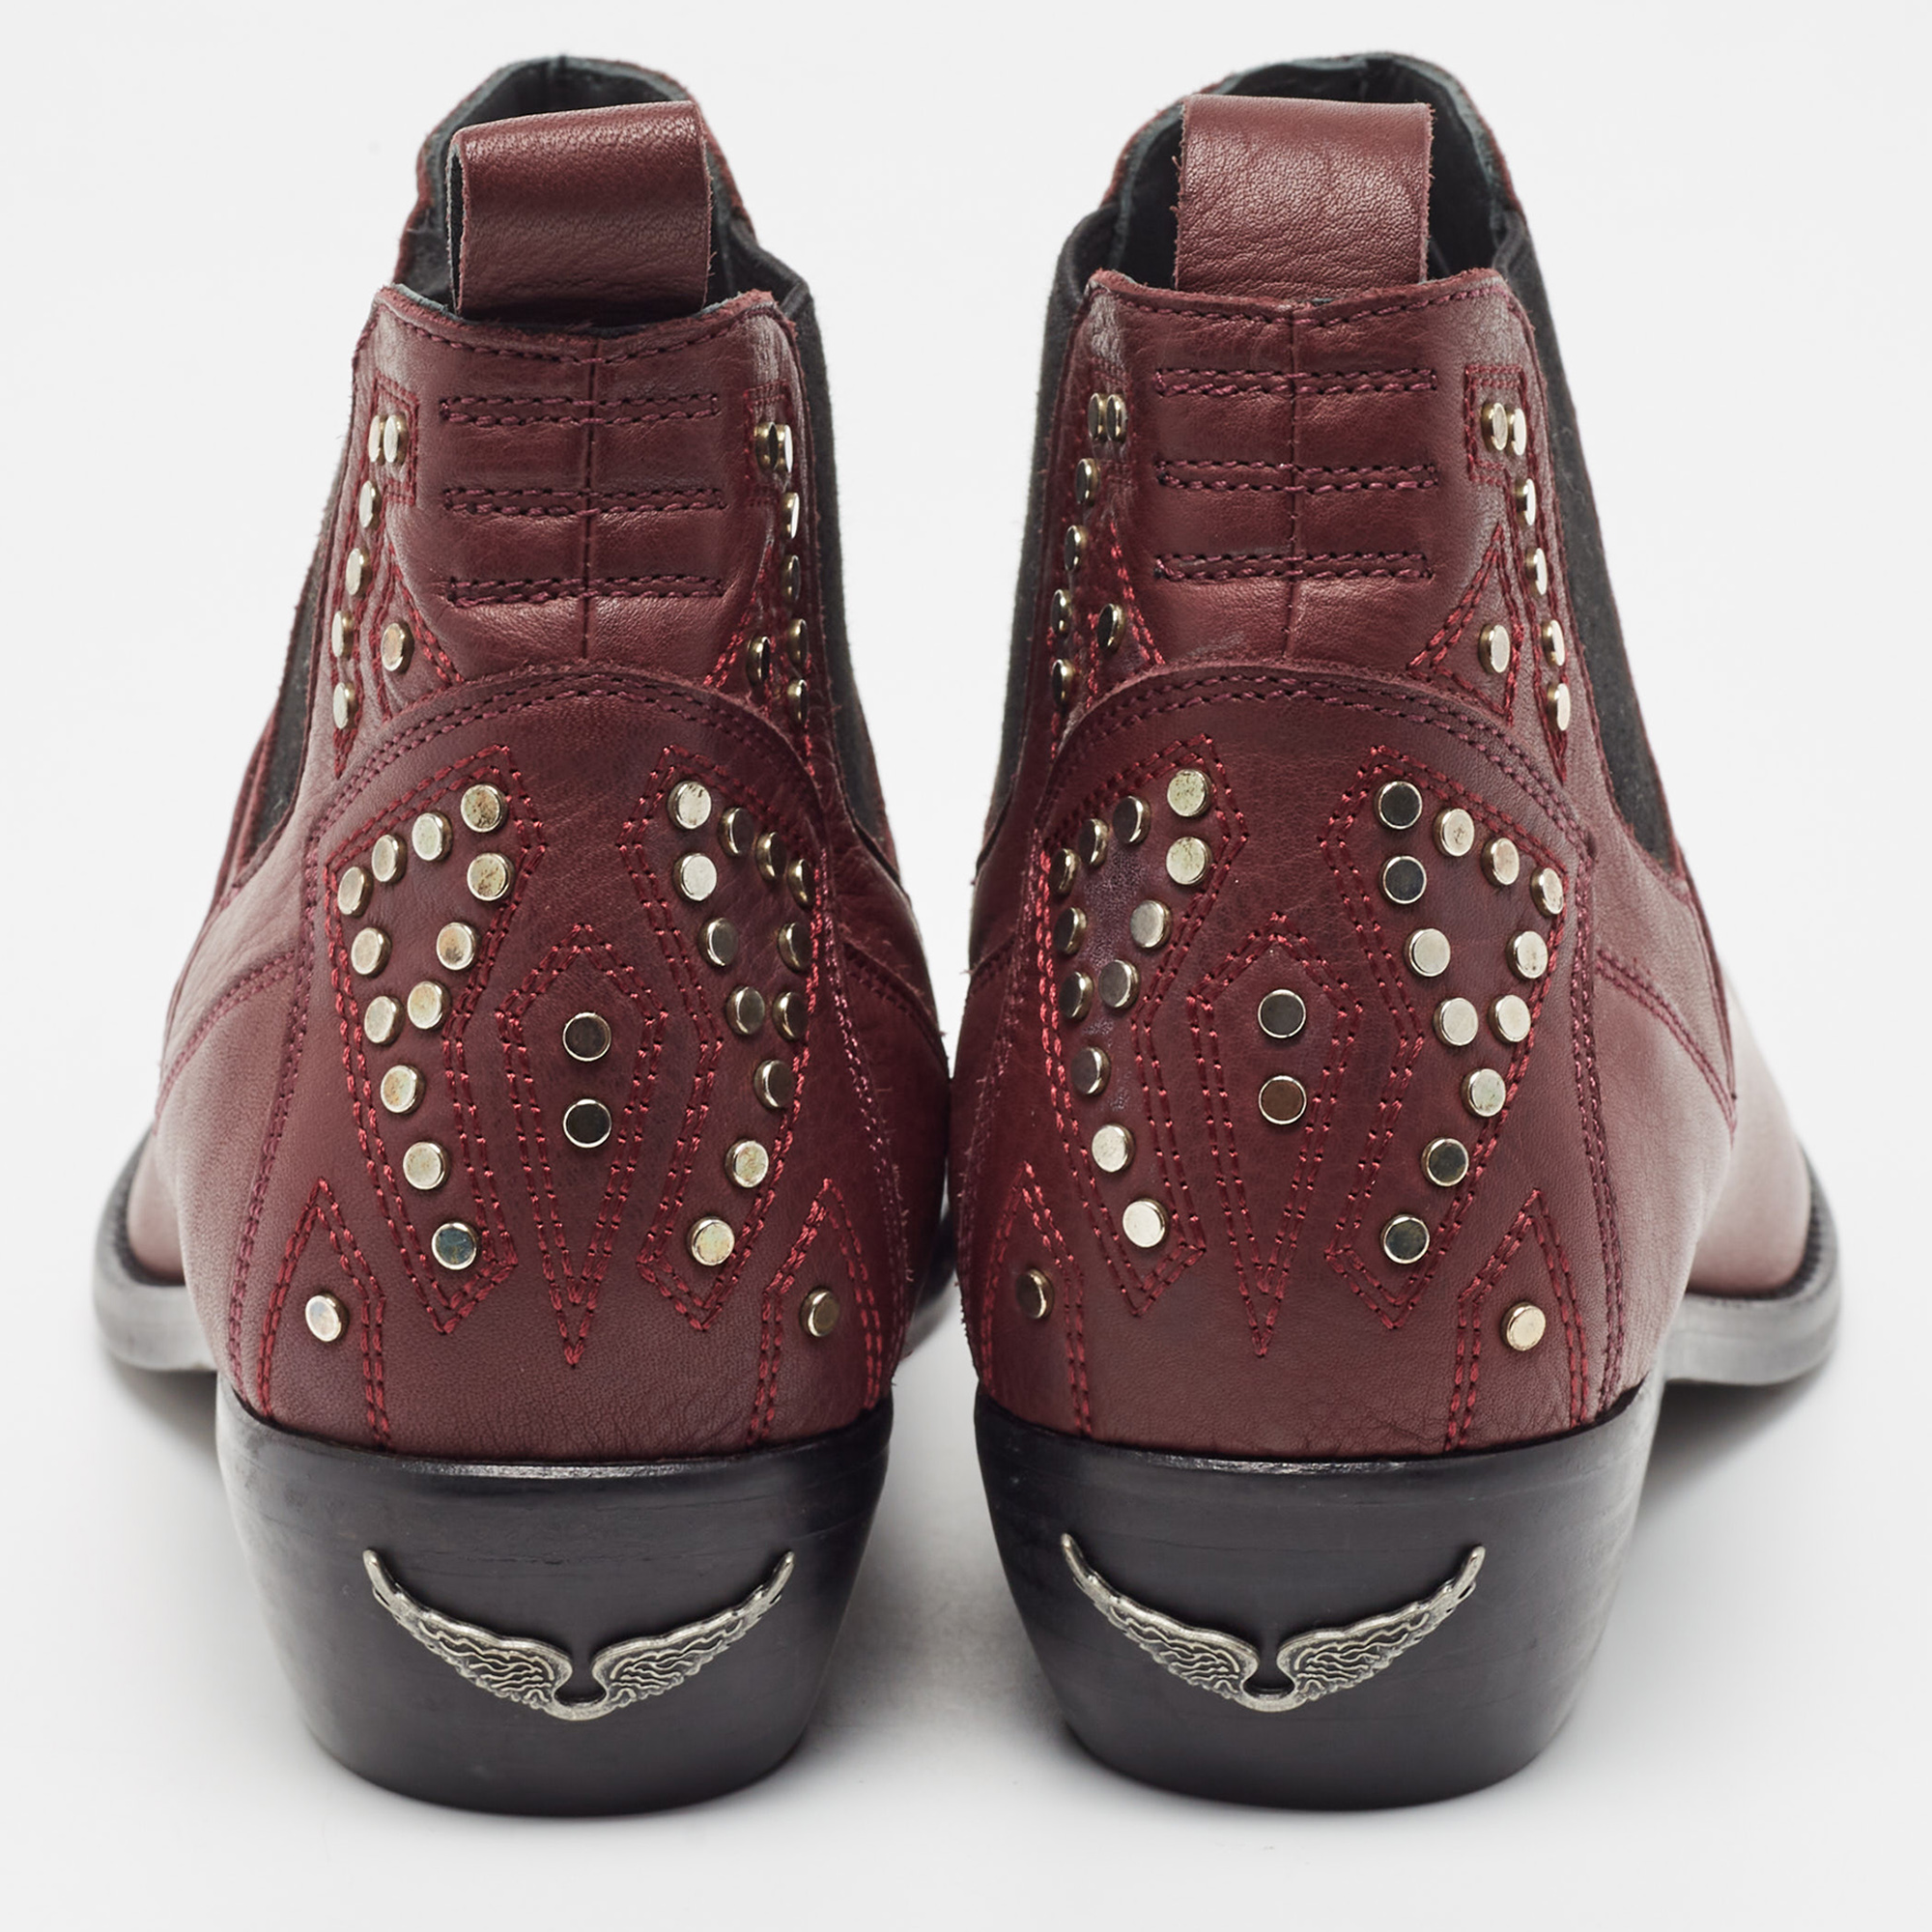 Zadig & Voltaire Burgundy Leather Thylana Studded Ankle Boots Size 41